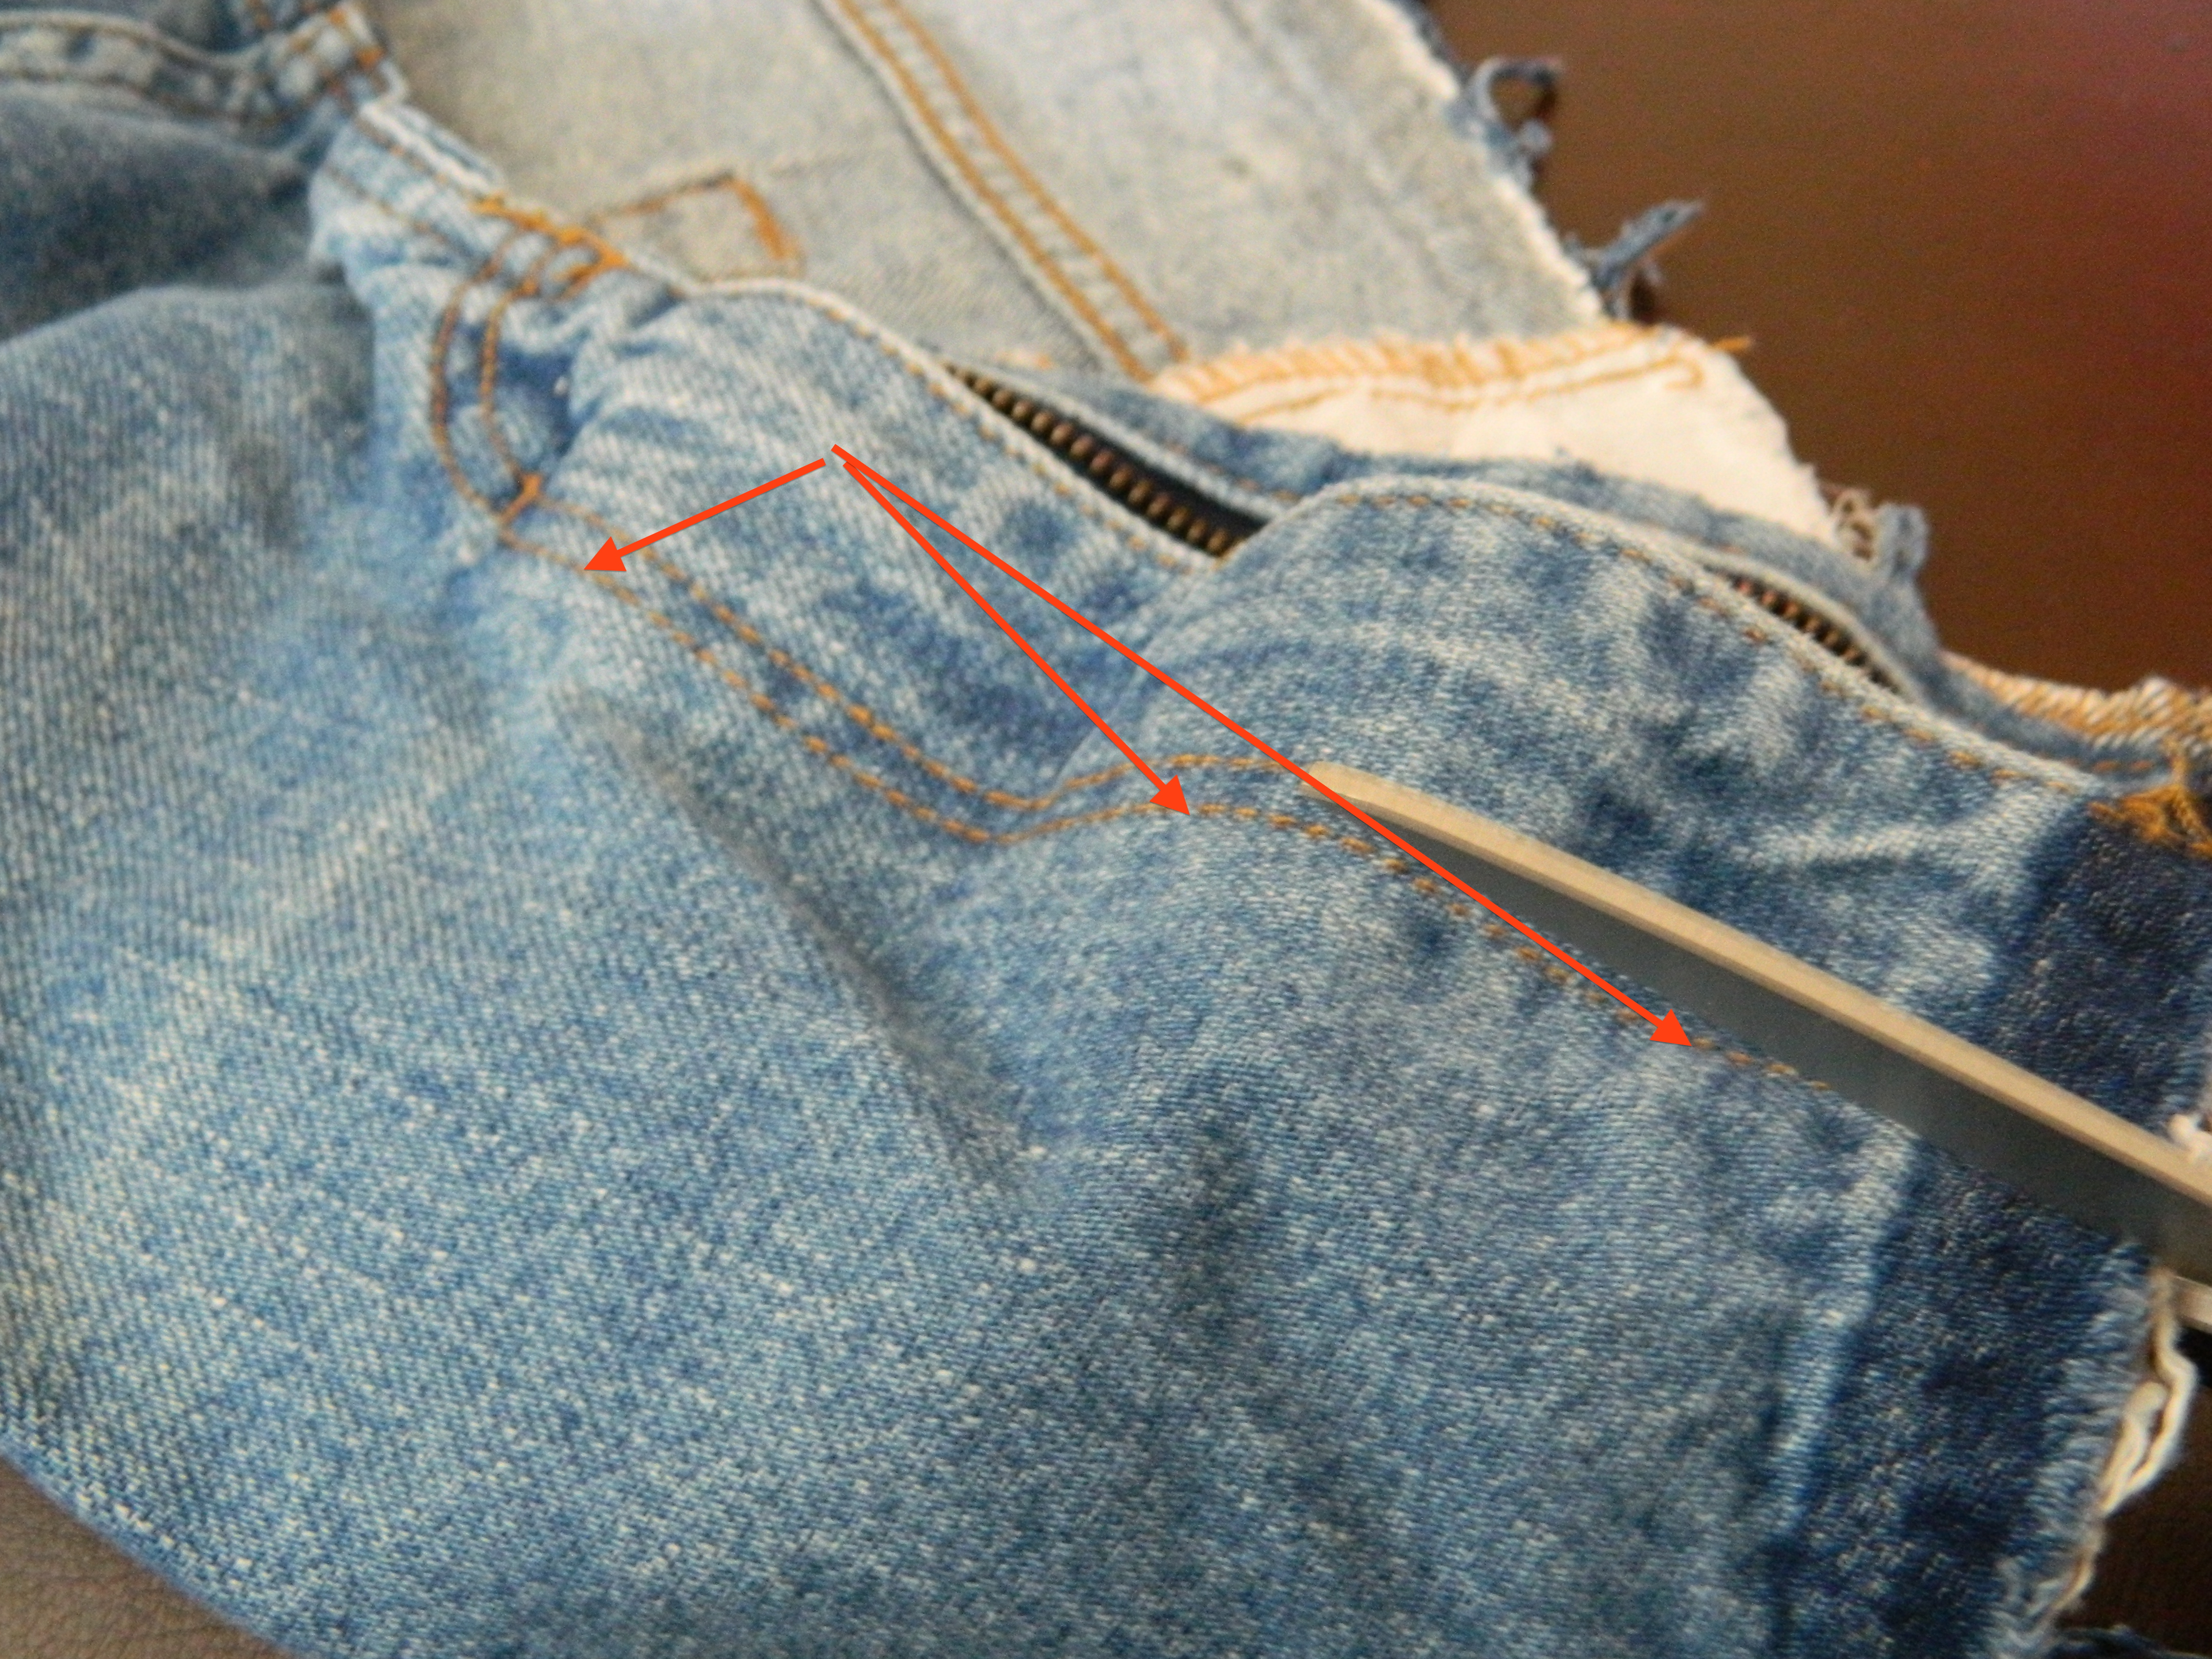 taking apart jeans | On My Creative Side